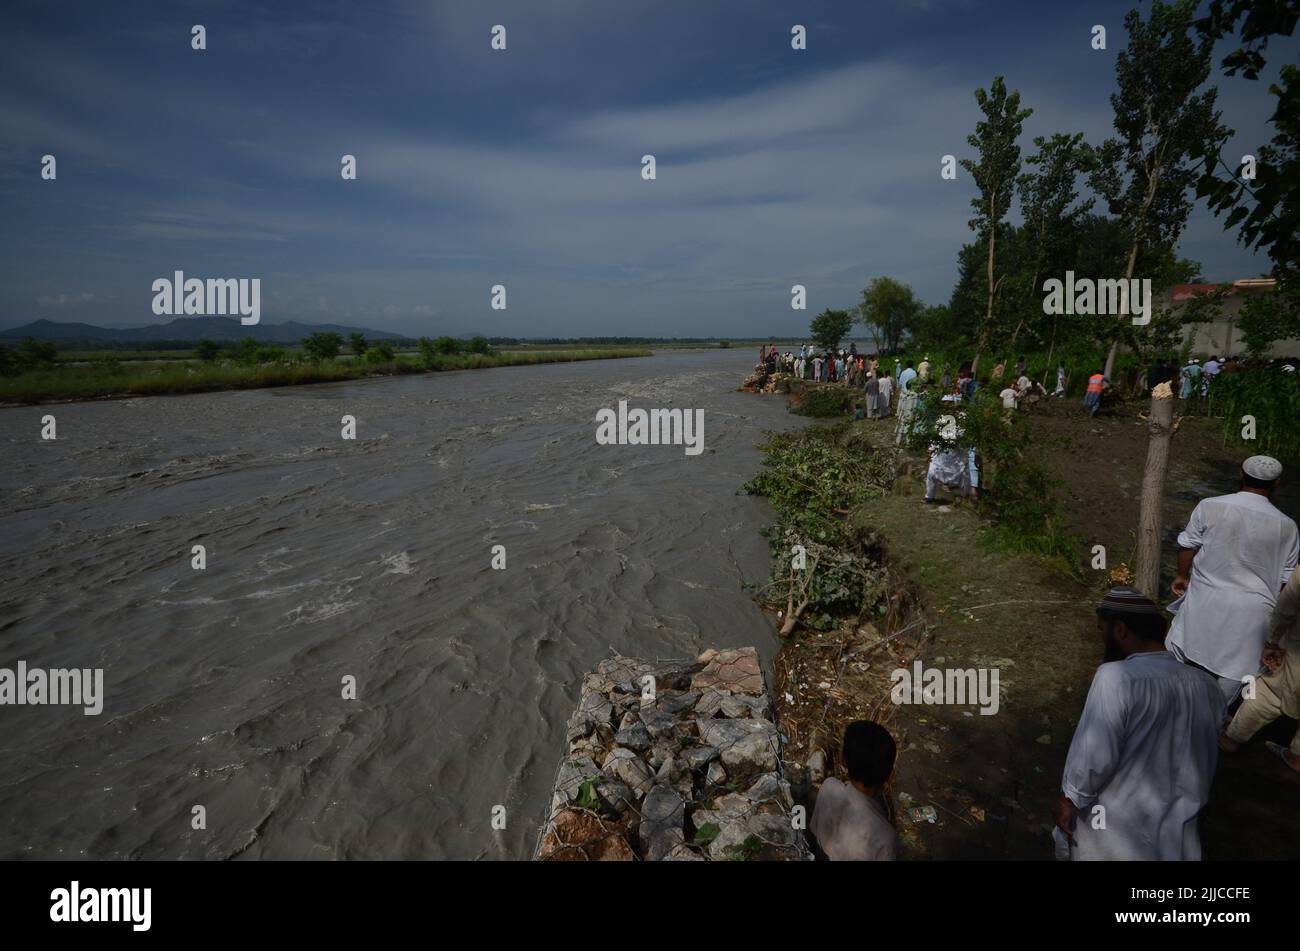 Peshawar, Khyber Pakhtunkhwa, Pakistan: July 24, 2022,  Flood in Mathura Shagai Hindkian Wazir Qila area of Peshawar since seven o'clock in the morning. Safety dams were to be built at several places under the Act, but due to the continuous increase in floods, the safety dams at three places have also been washed away. The administration has already opened the spills of Varsik Dam, while on the other hand, in Afghanistan and tribal areas. Due to continuous rain since last year, the water has diverted to the mentioned areas for which emergency measures are required. (Credit Image: © Hussain Al Stock Photo